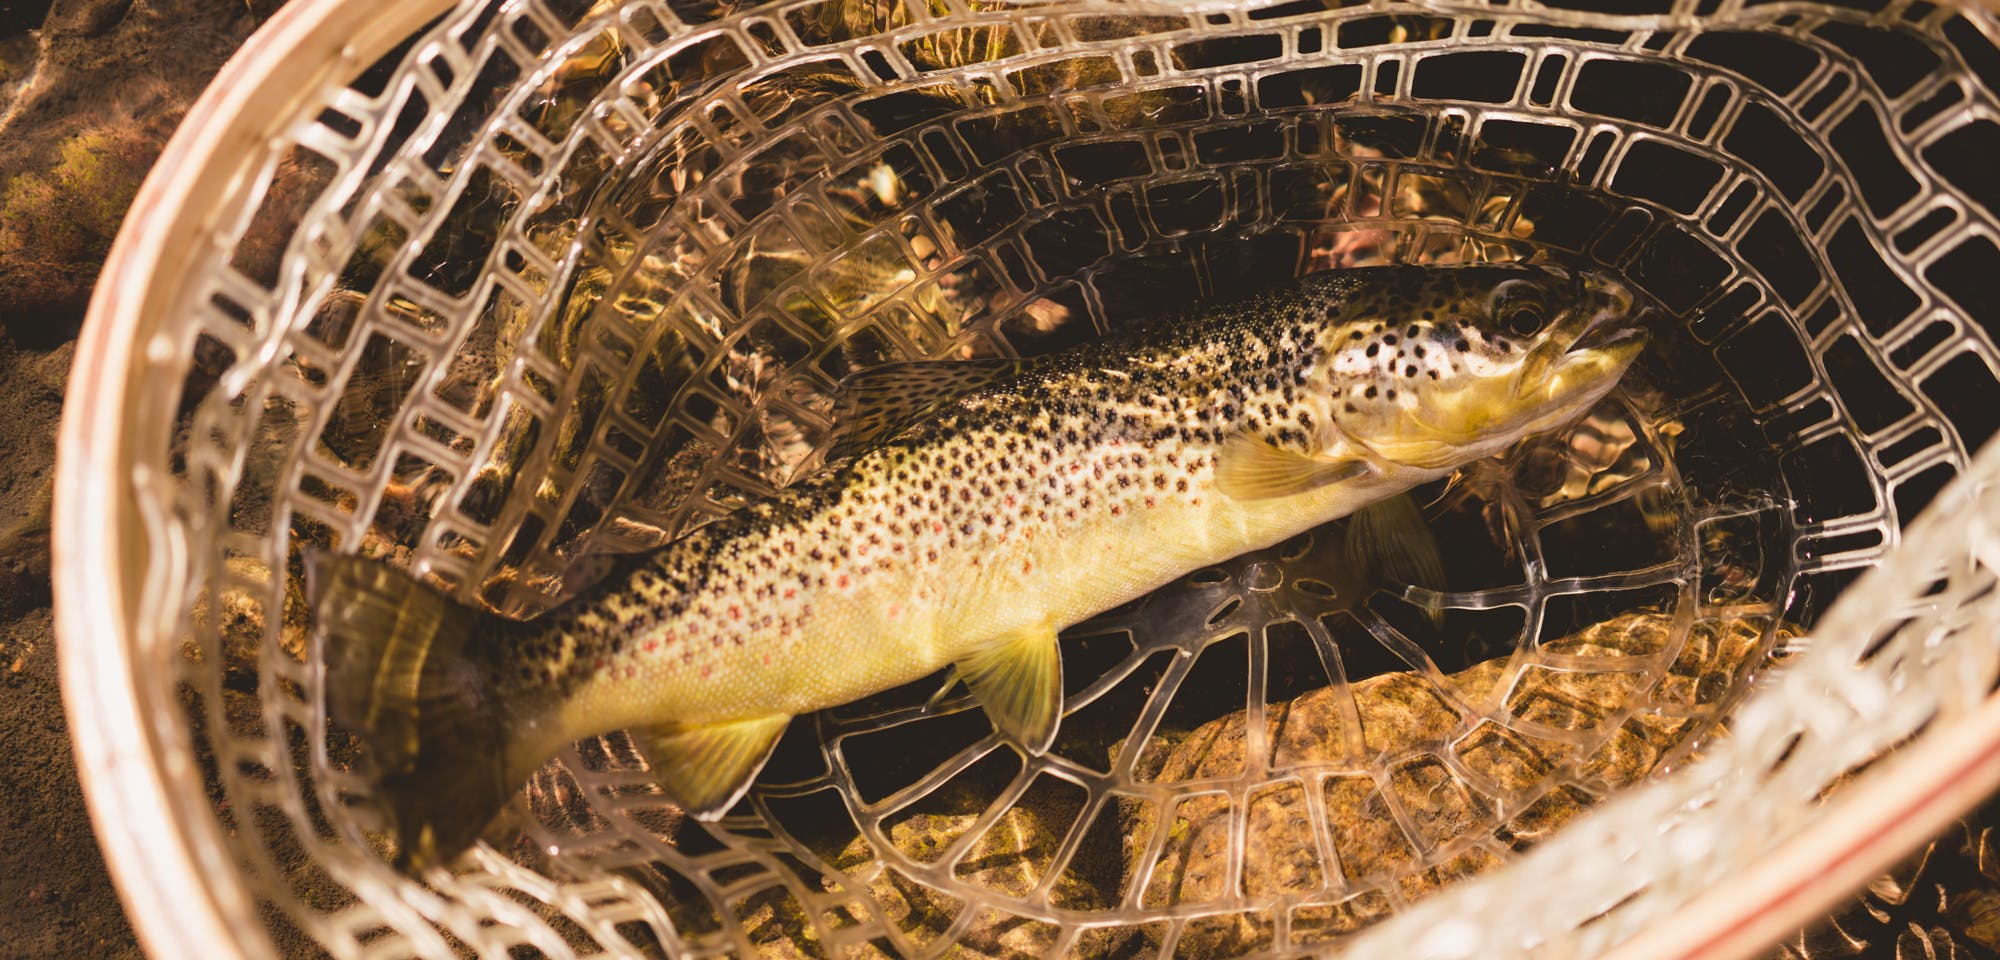 Fly Fishing Buyer’s Guide